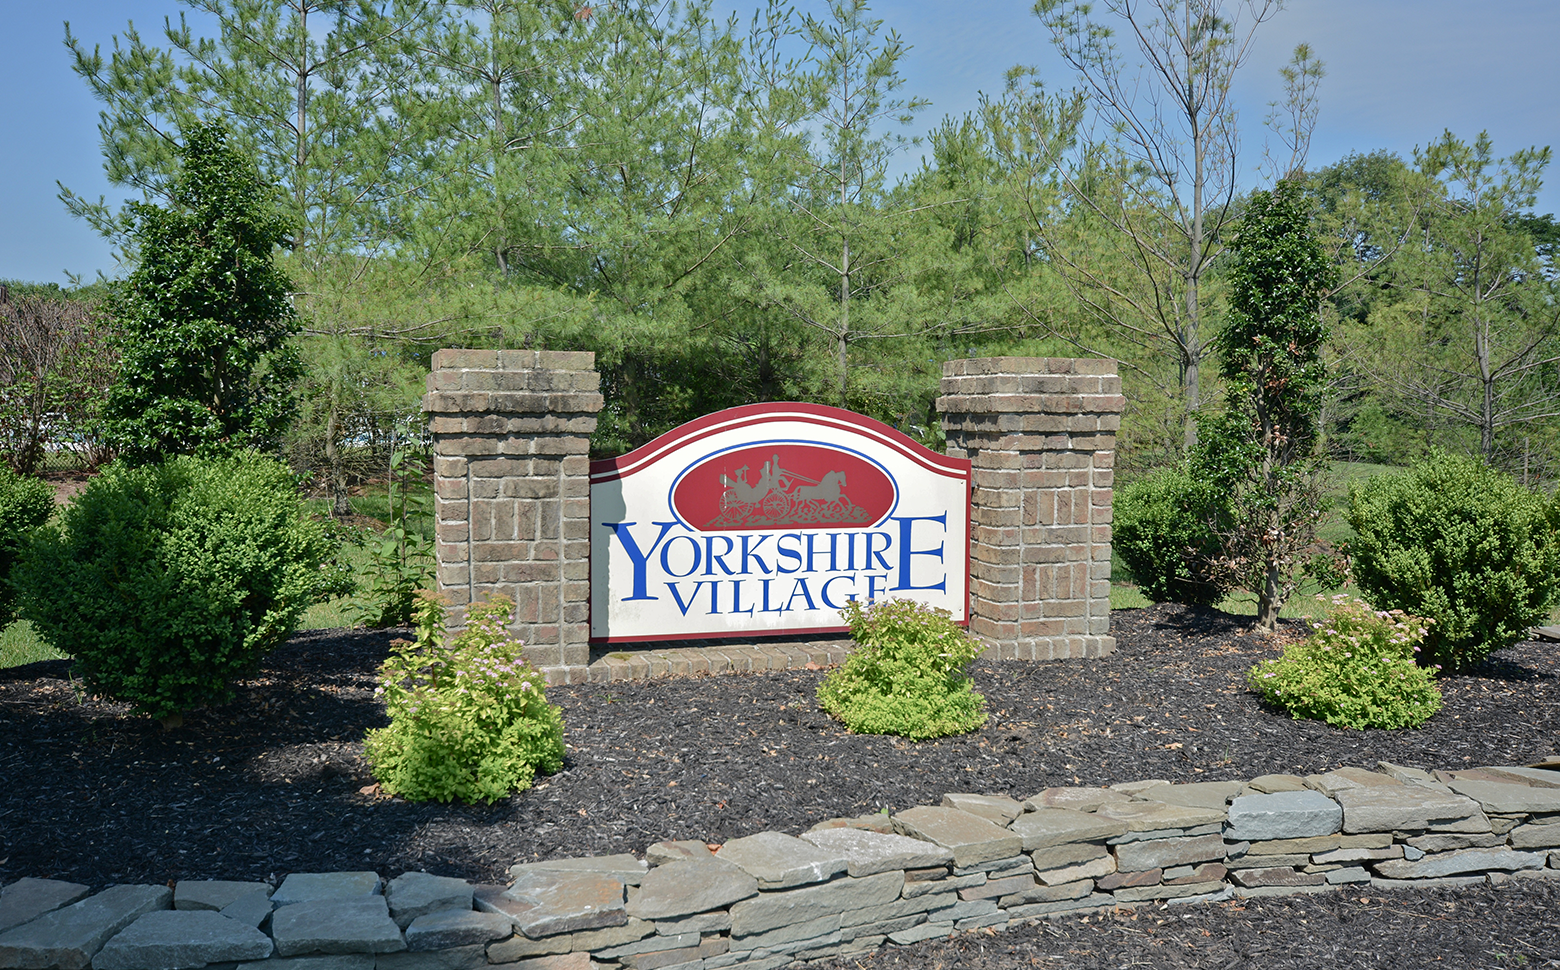 Yorkshire Village, Lawrence Township